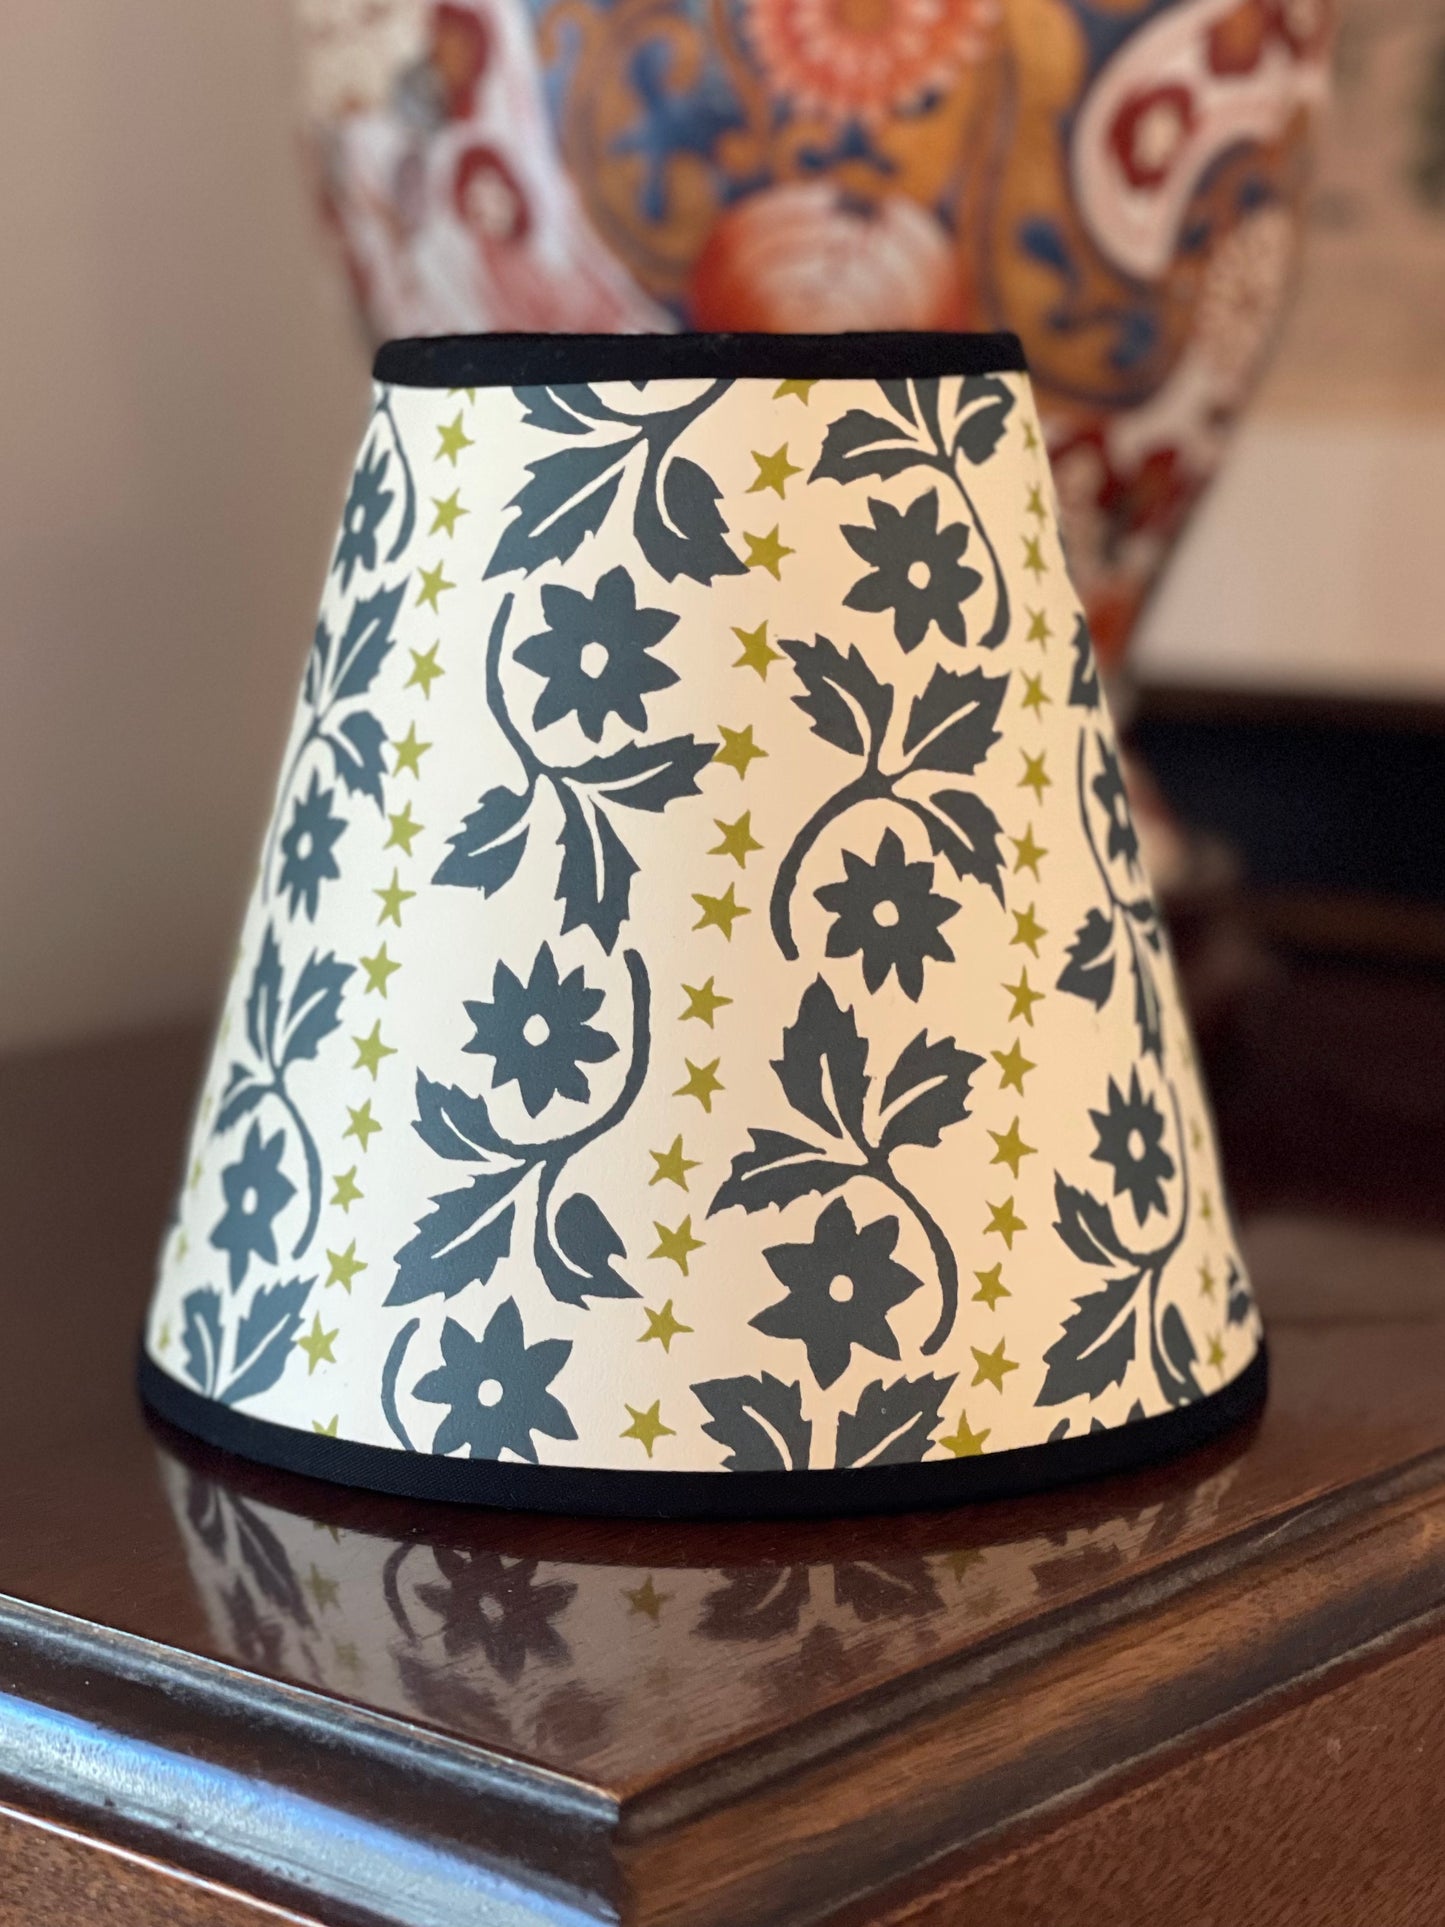 Small Clip-On Lampshade. Patterned Paper from England. "Leaves and Stars" Black Forest and Sap. Black Trim.